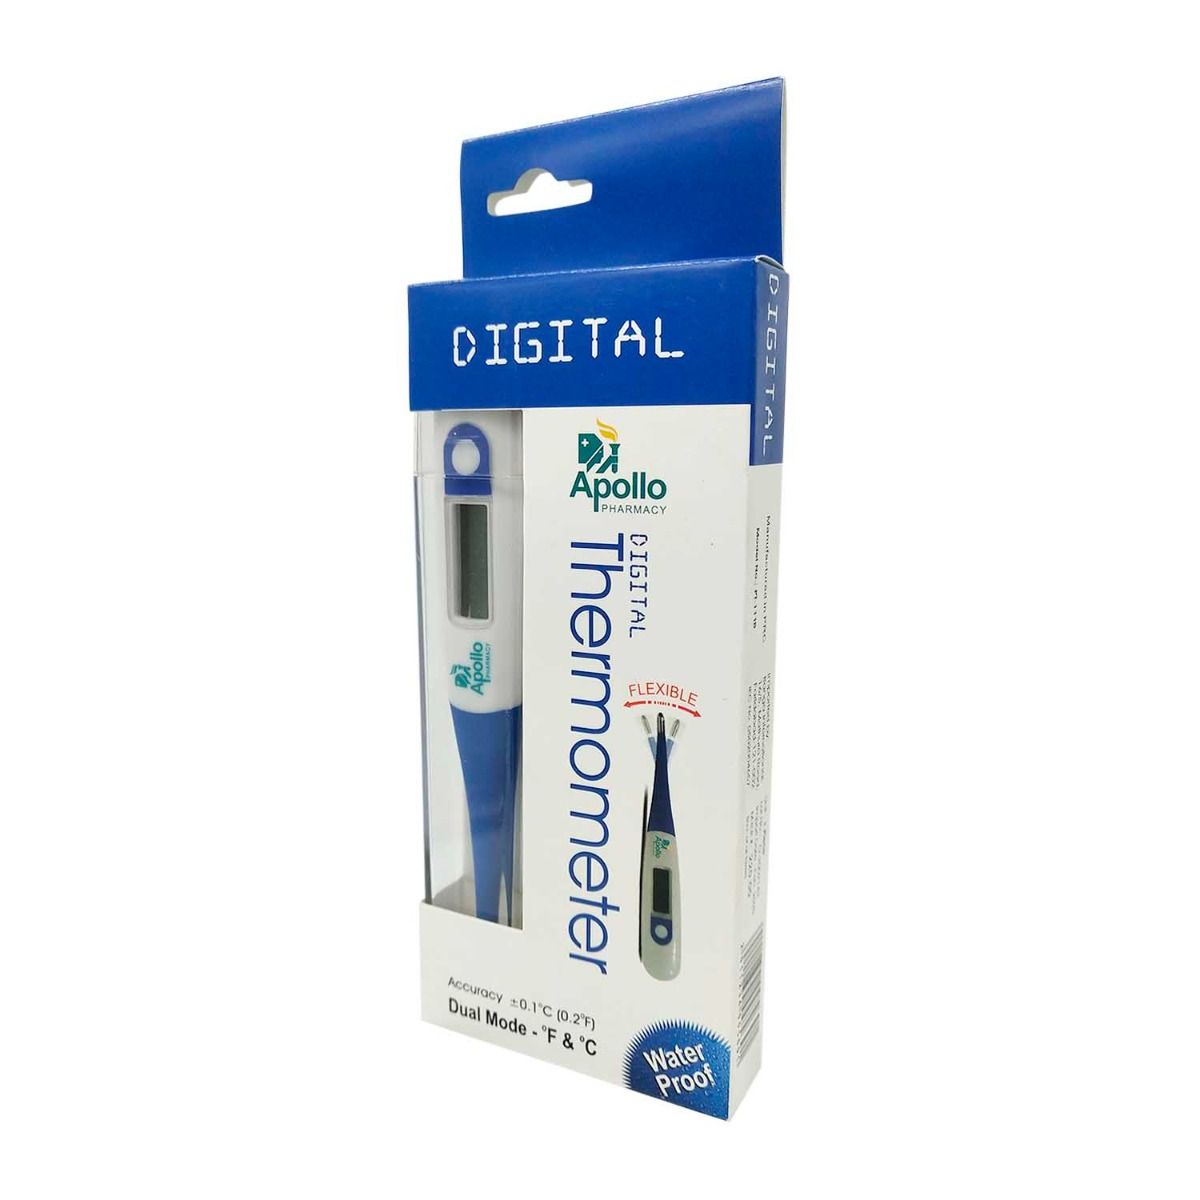 Apollo Pharmacy Digital Flexible Thermometer, 1 Count, Pack of 1 